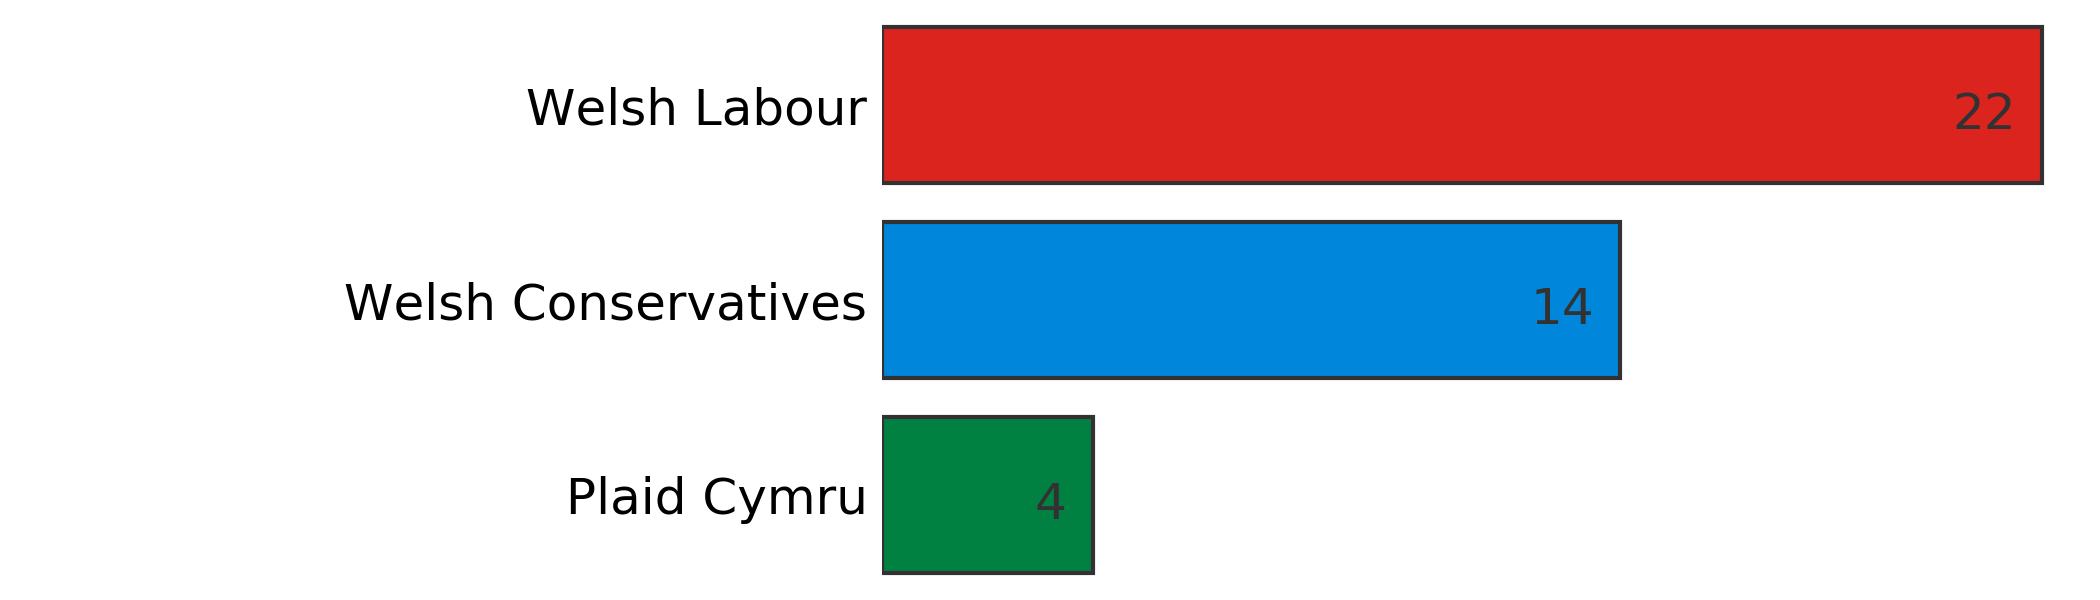 Graphic showing the number of Welsh seats won by each party.